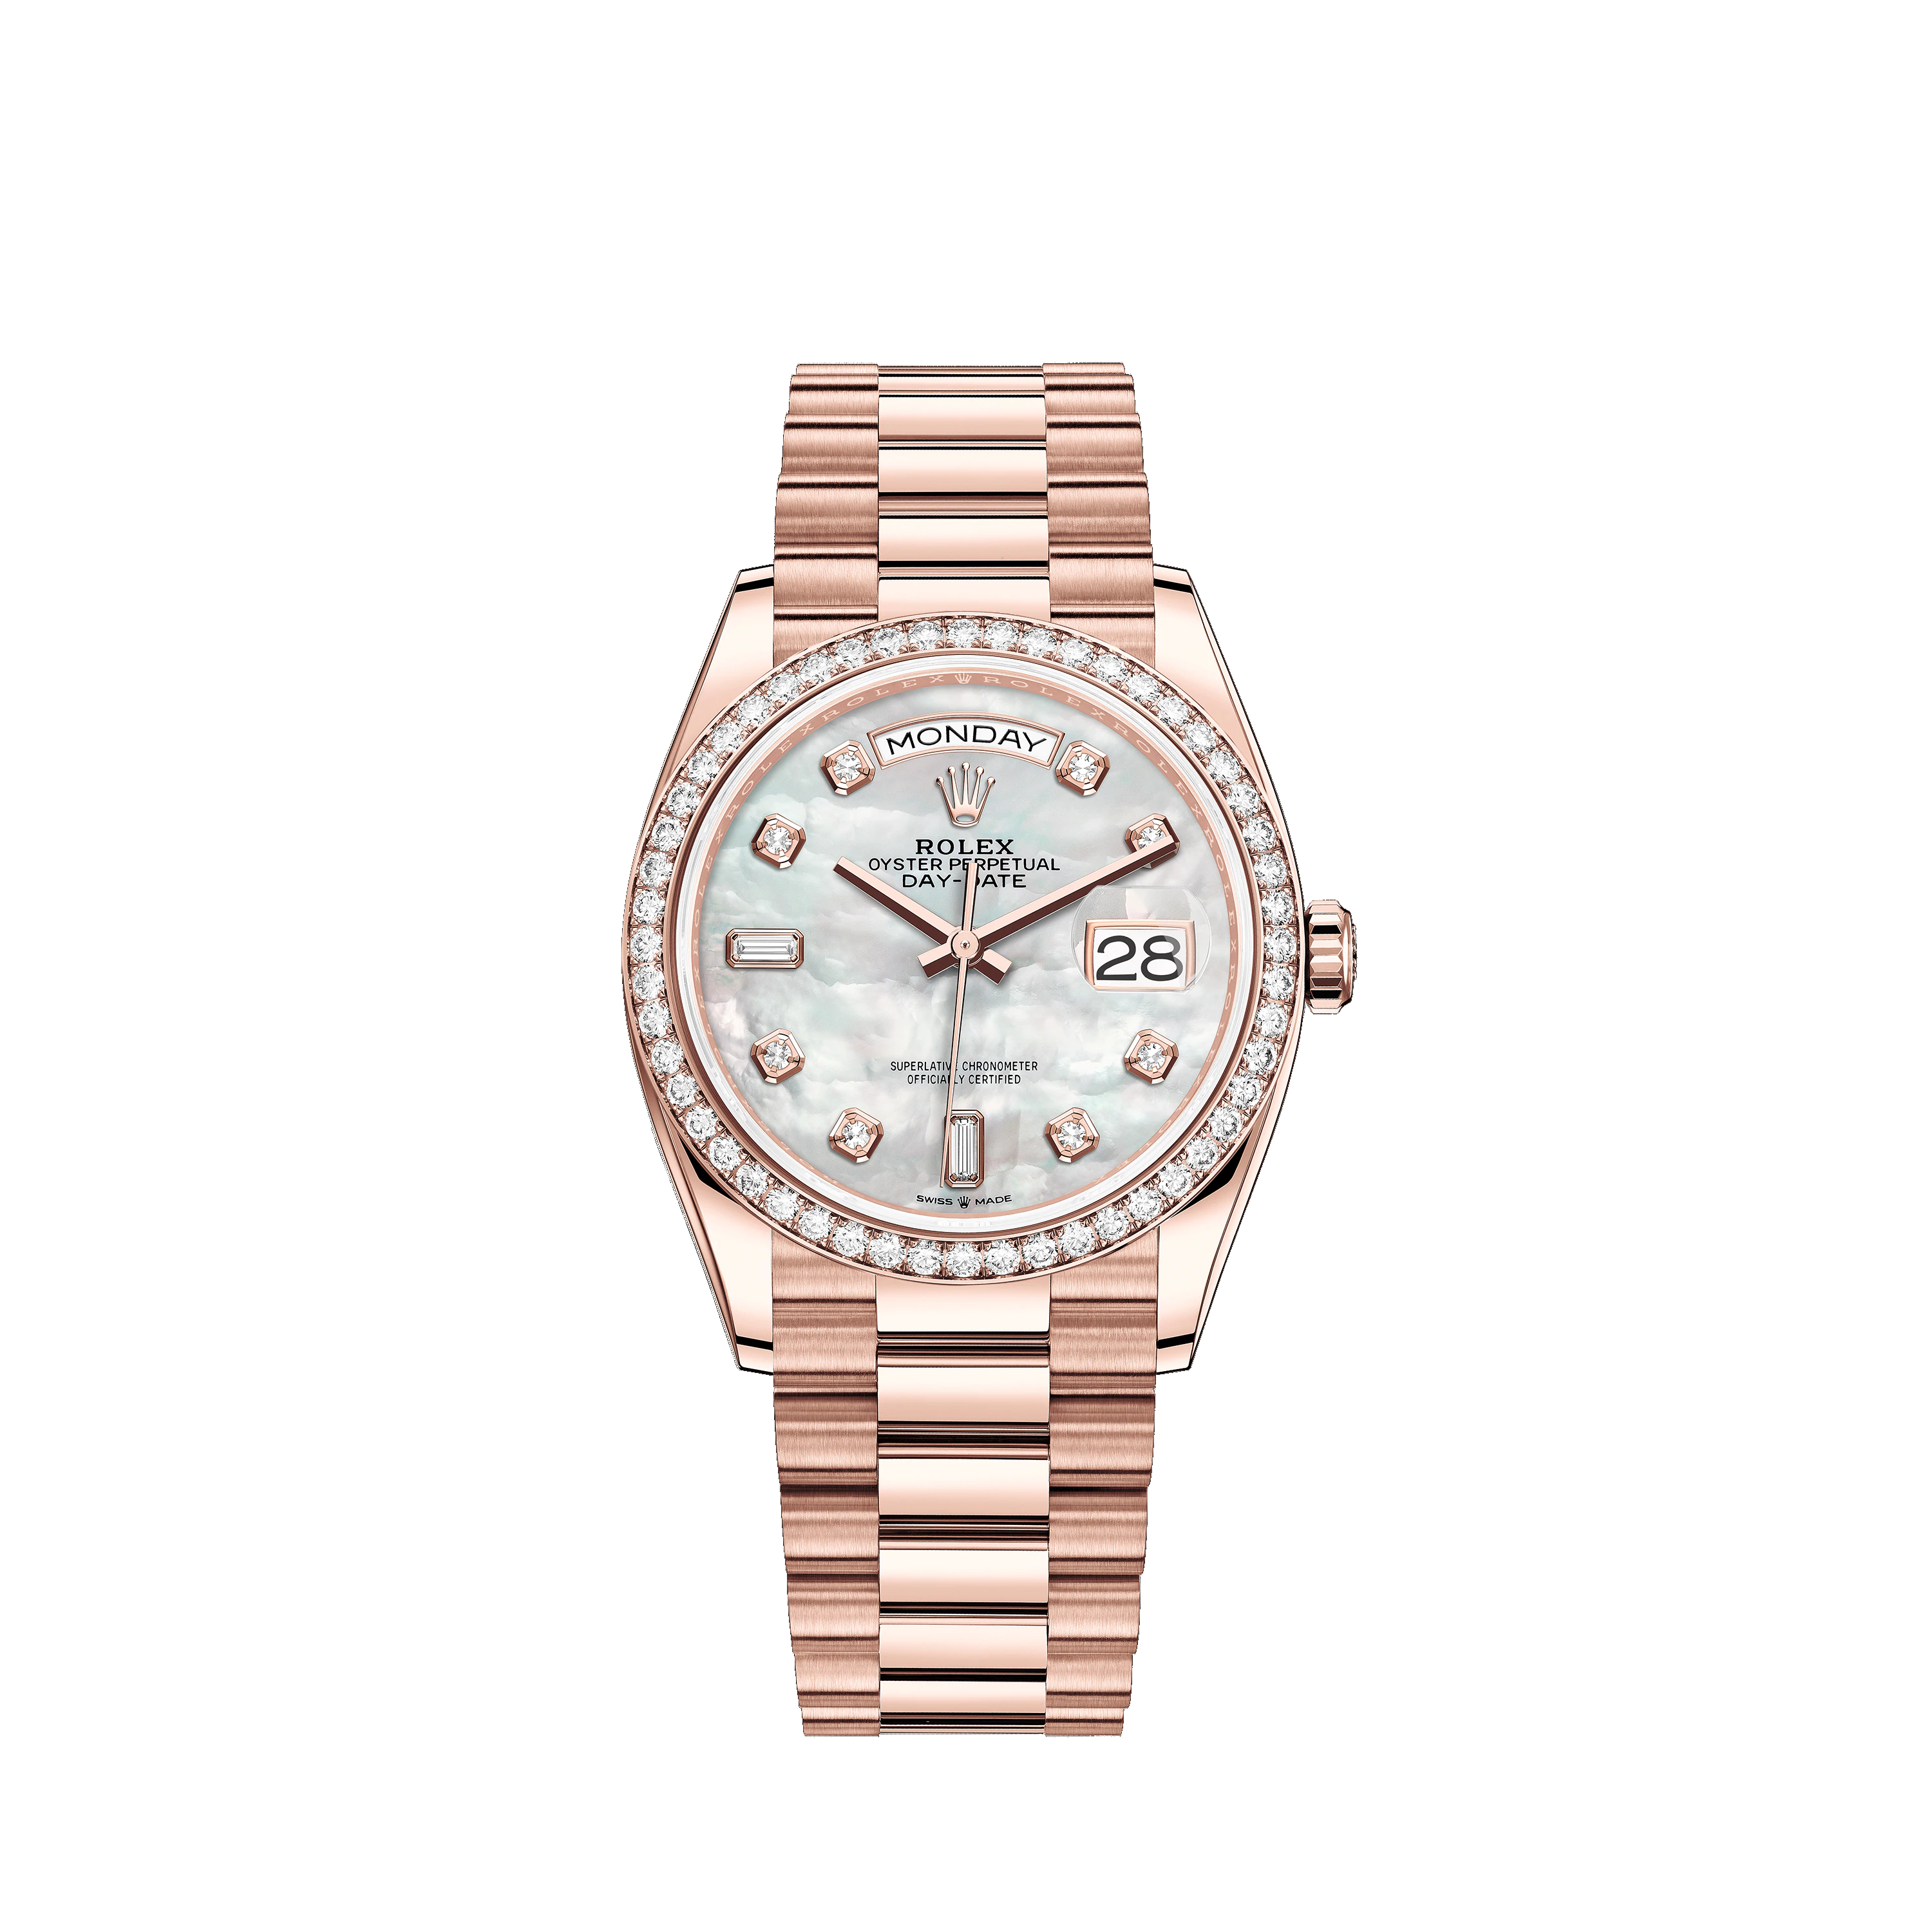 Day-Date 36 128345RBR Rose Gold & Diamonds Watch (White Mother-of-Pearl Set with Diamonds)